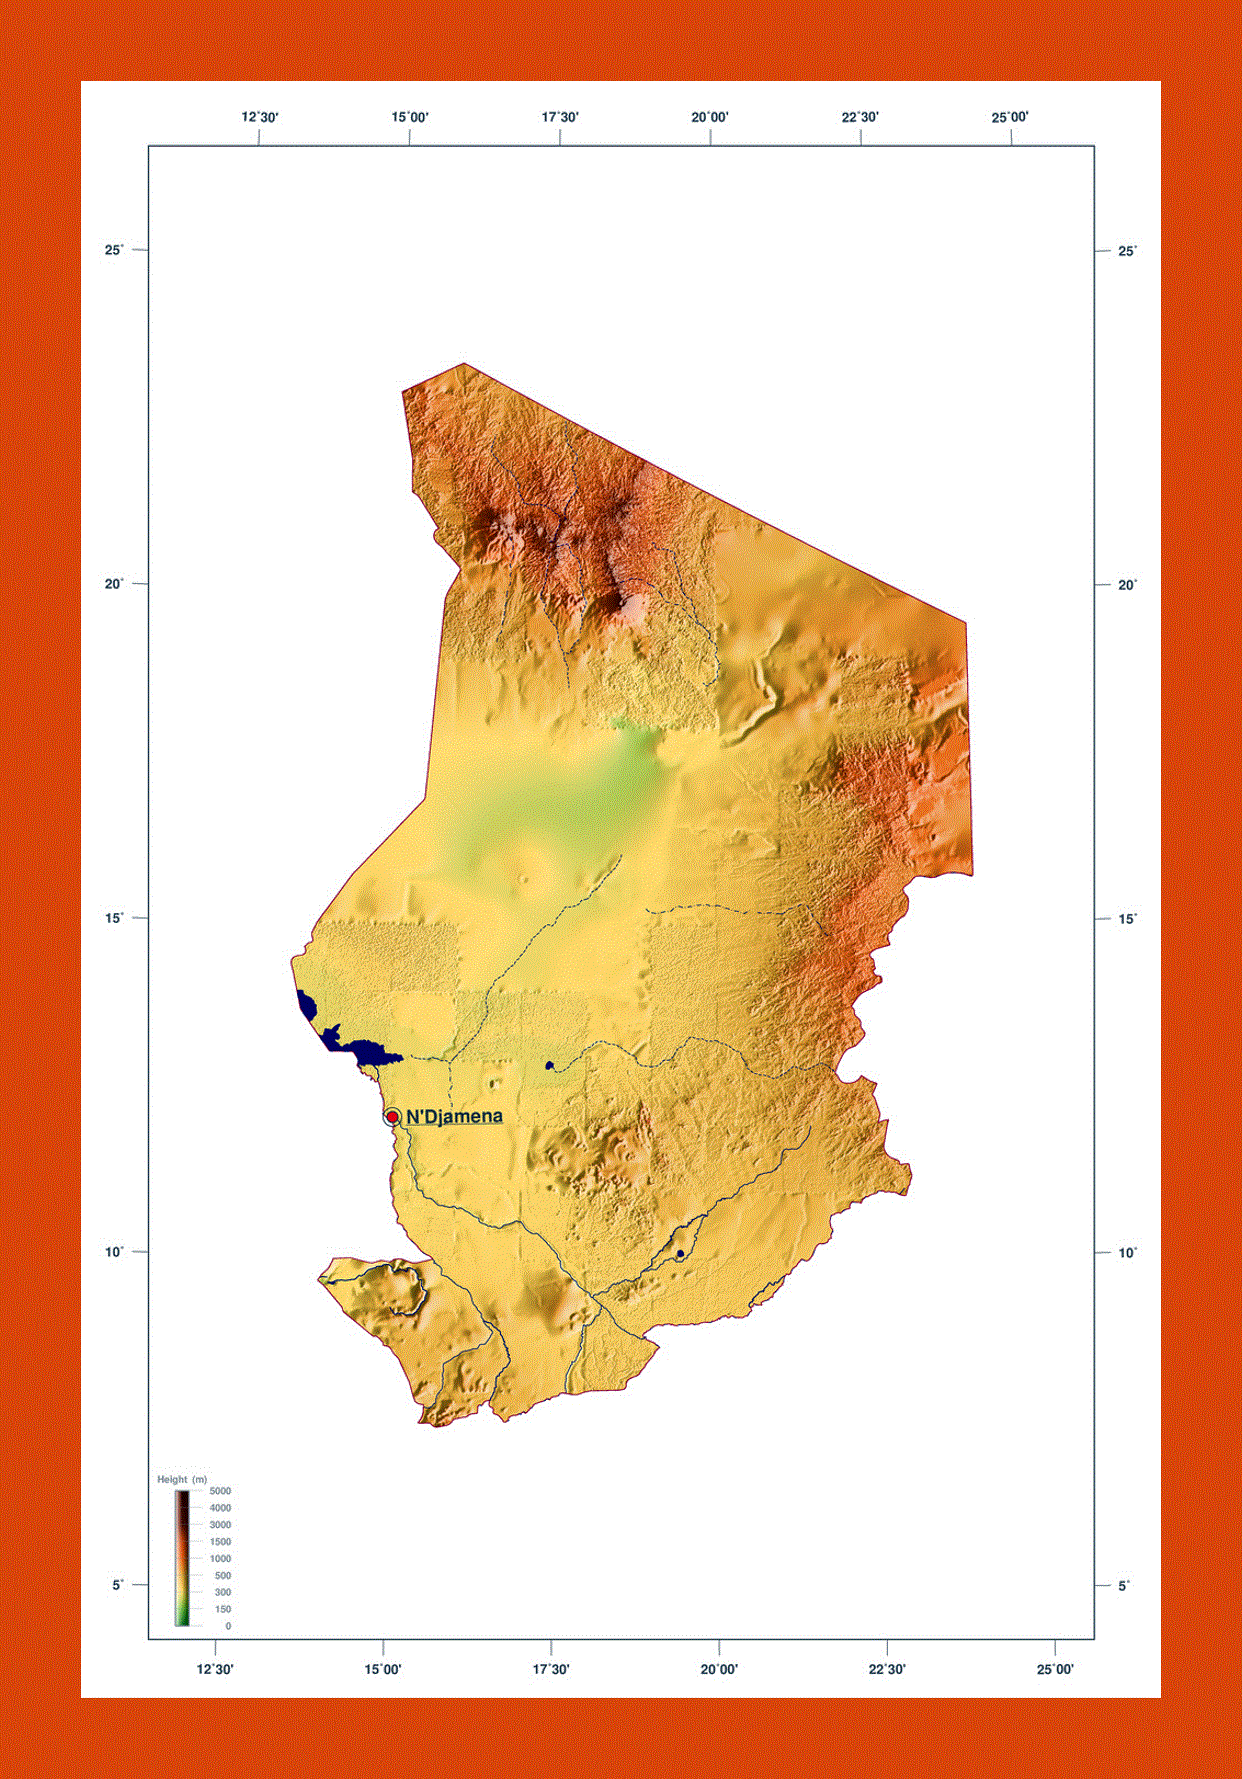 Elevation map of Chad